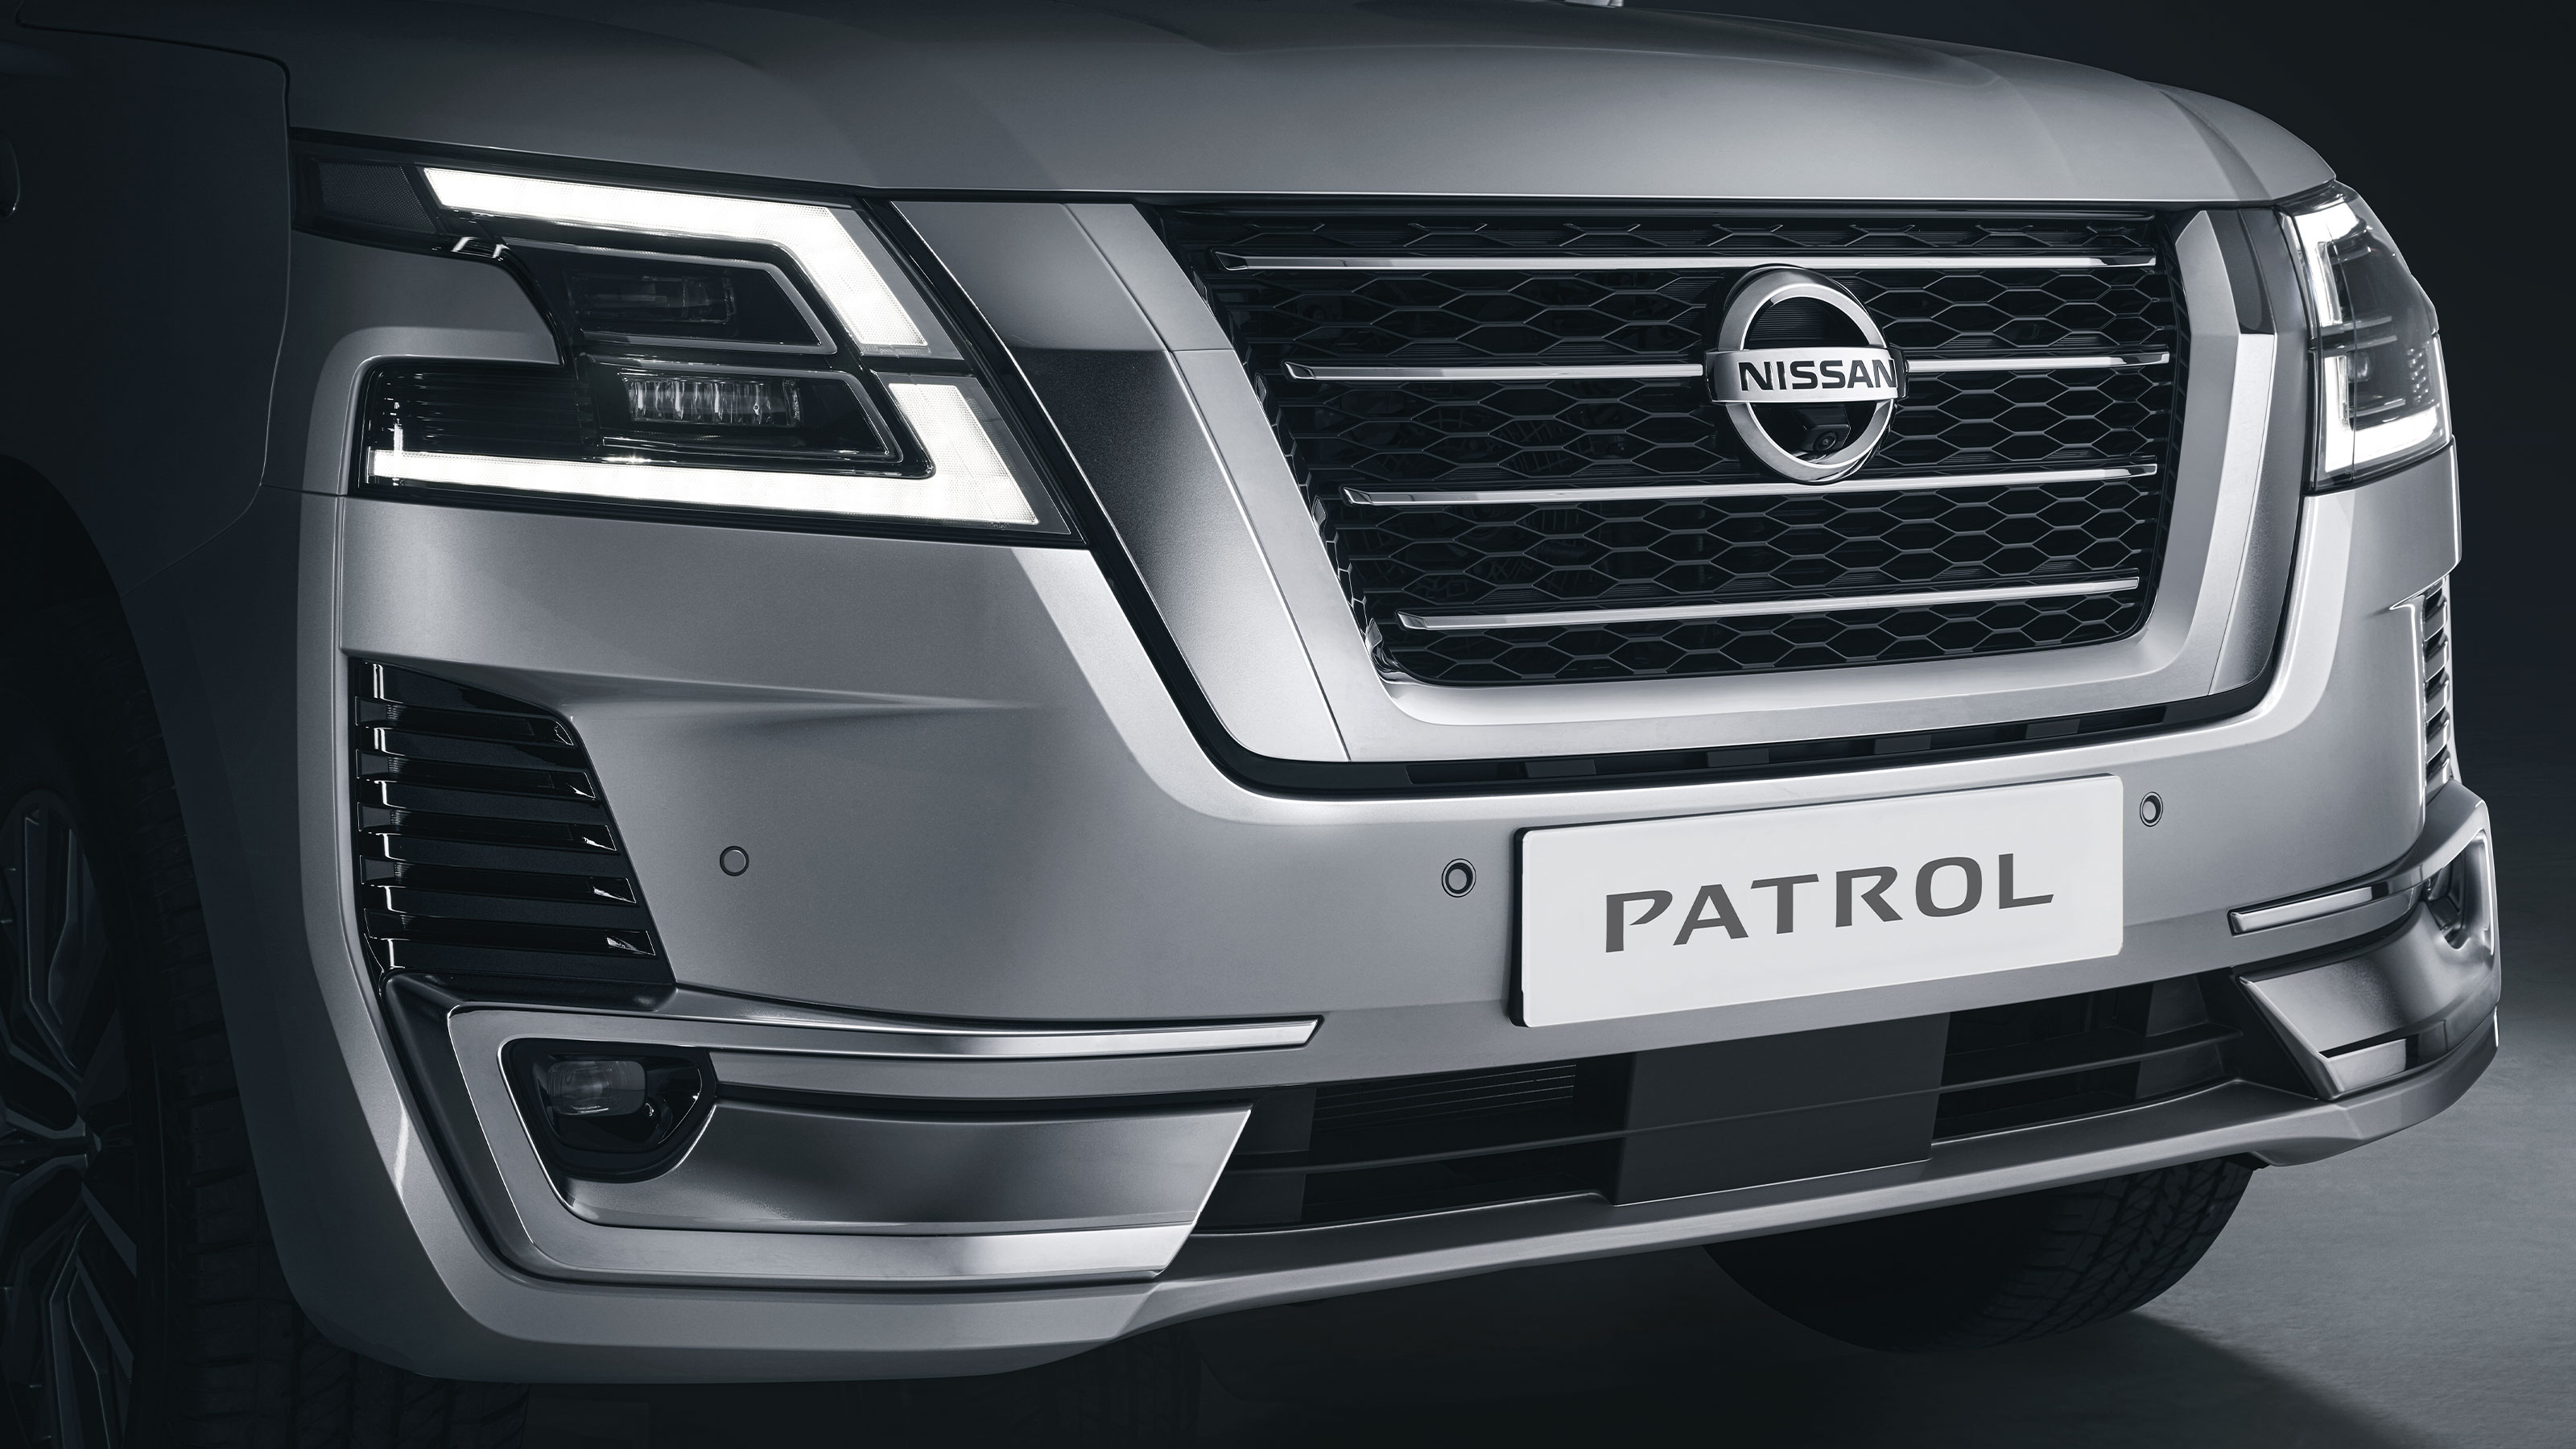 Nissan Patrol exterior - Front Headlight and Grille